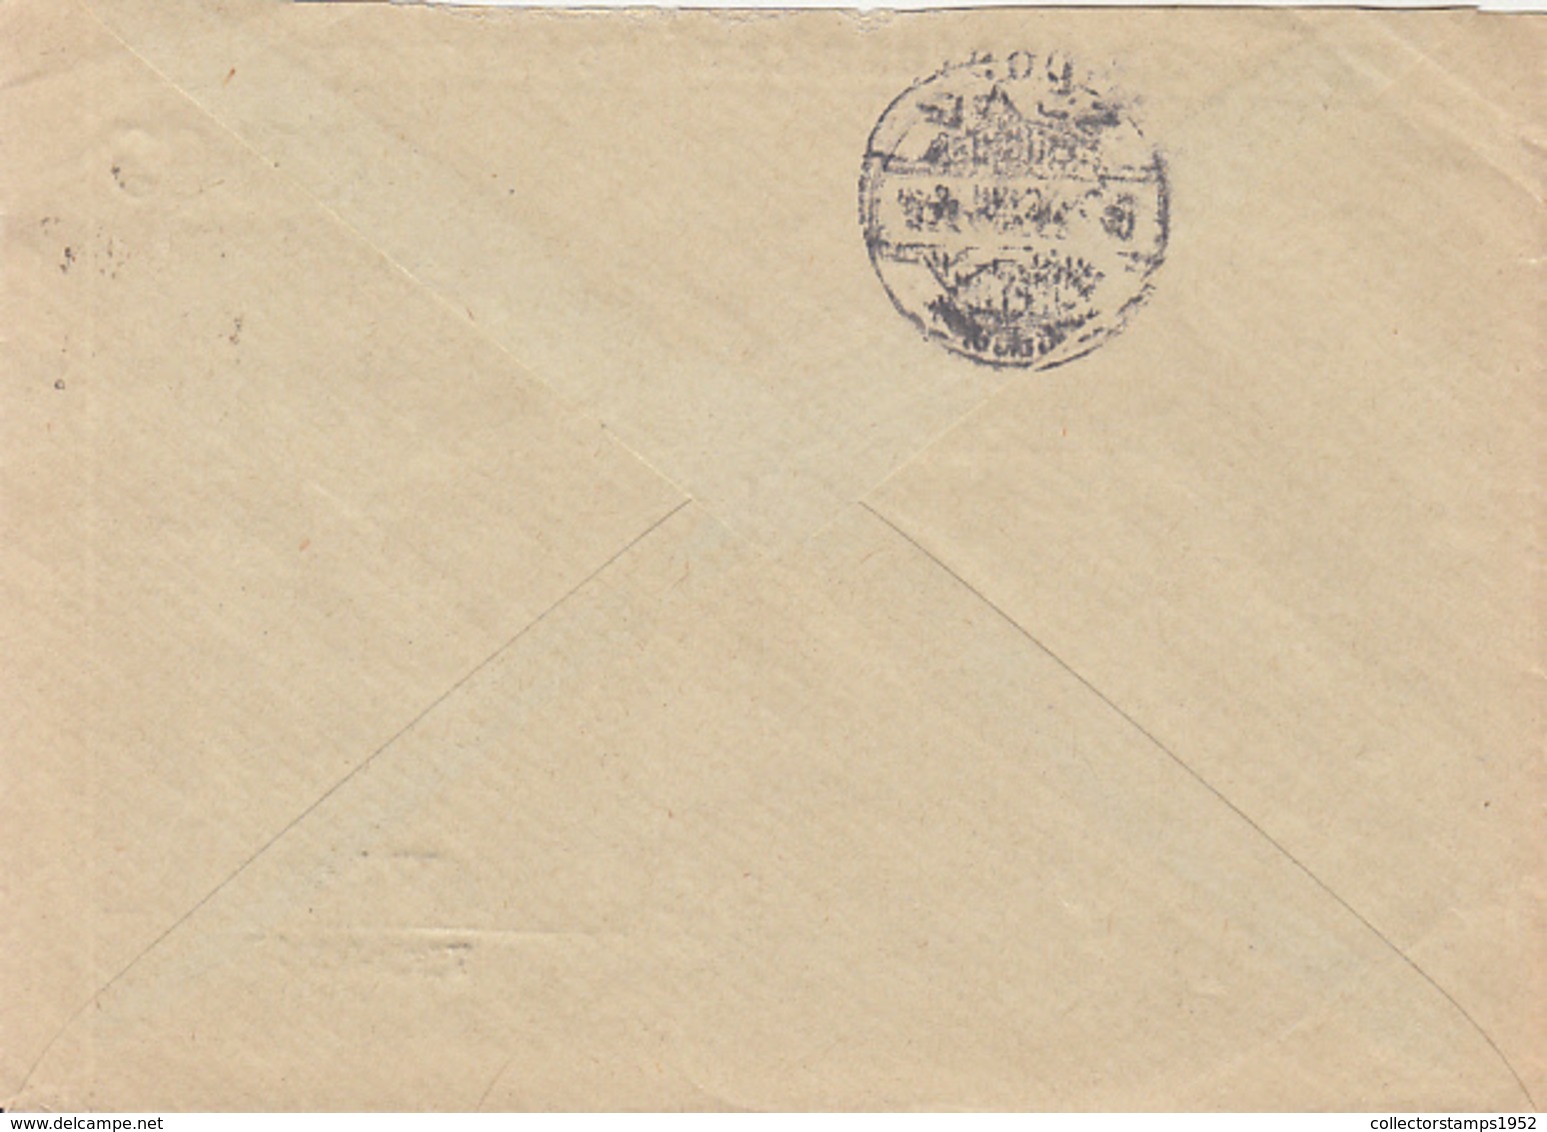 82636- AMOUNT 250 FILLERS OFFICIAL STAMPS ON ENTERPRISE HEADER COVER, 1926, HUNGARY - Officials